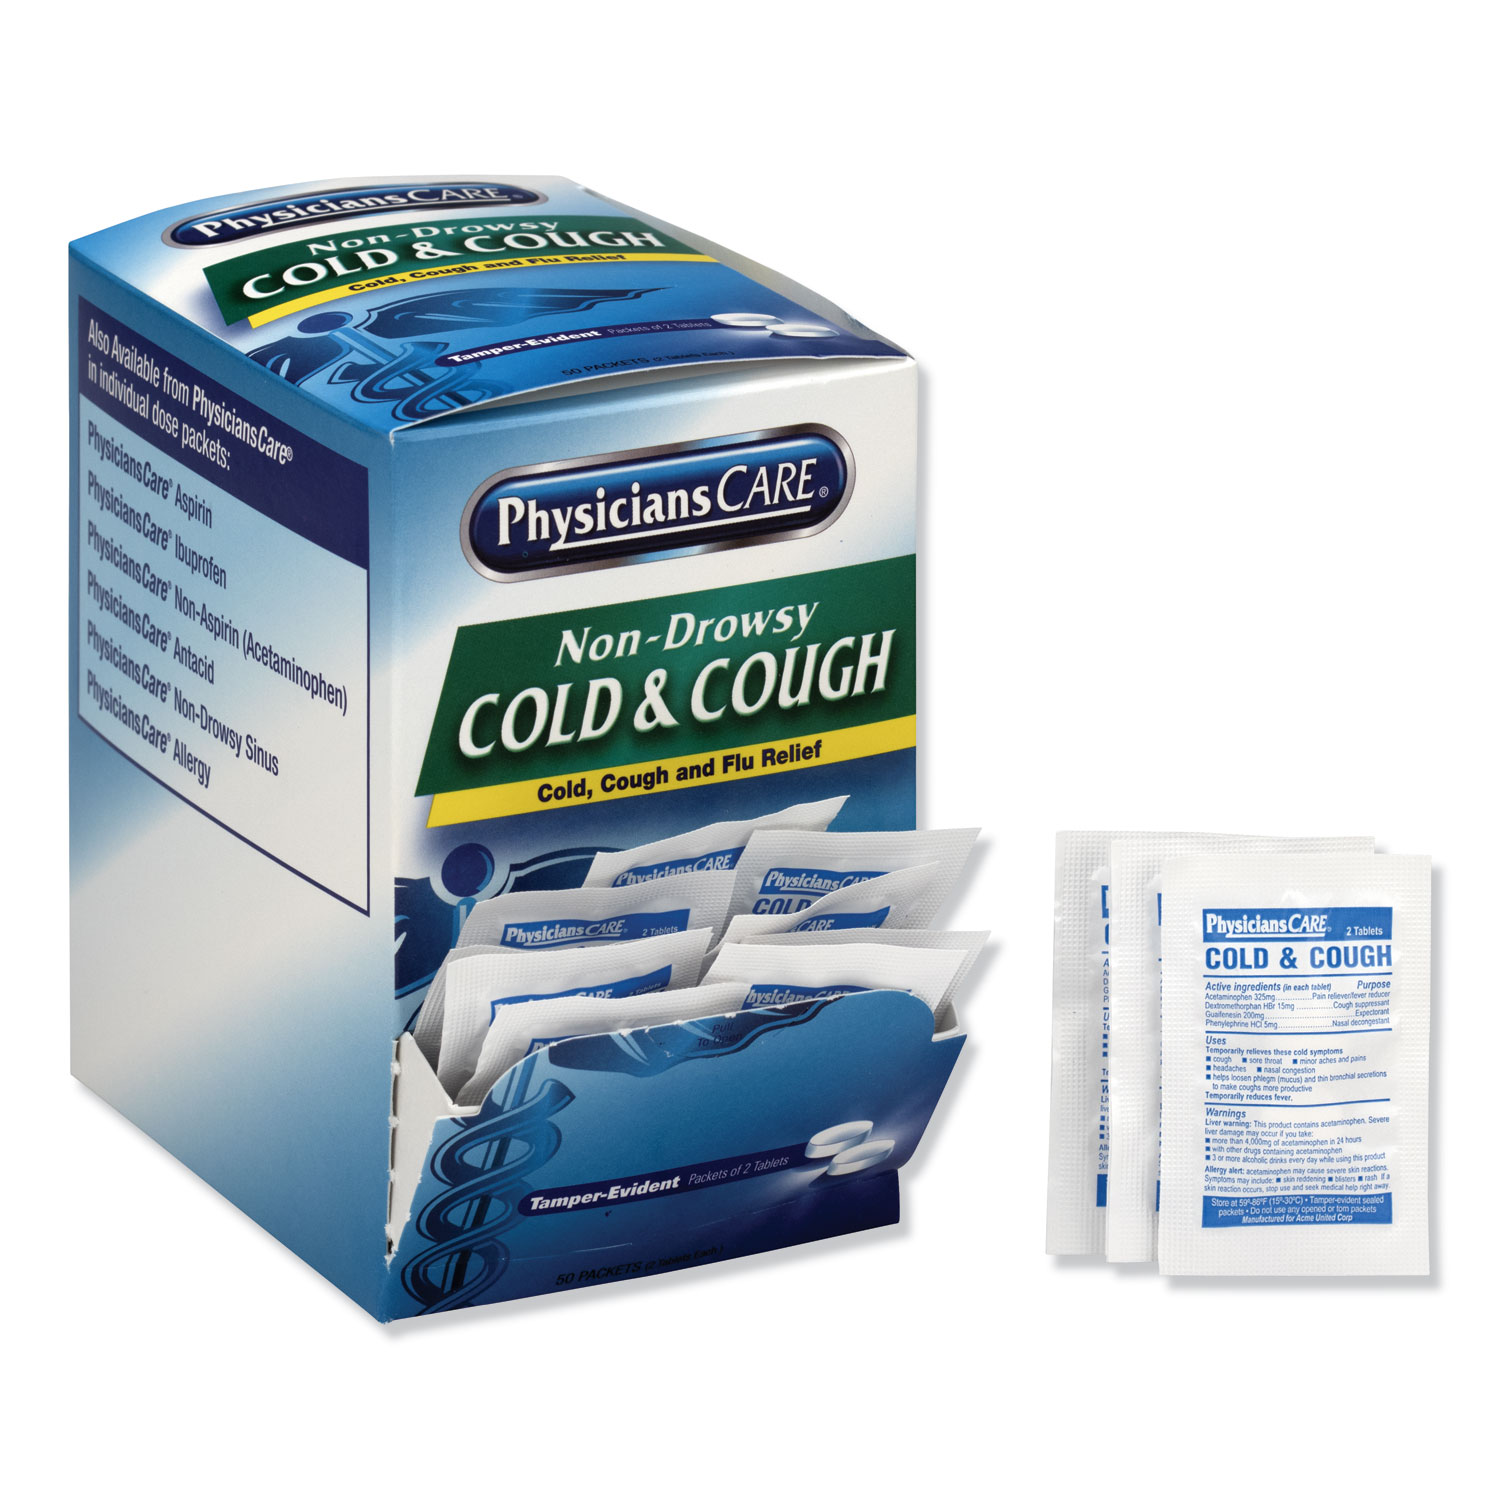  PhysiciansCare 90092-004 Cold and Cough Congestion Medication, Two-Pack, 50 Packs/Box (ACM90092) 